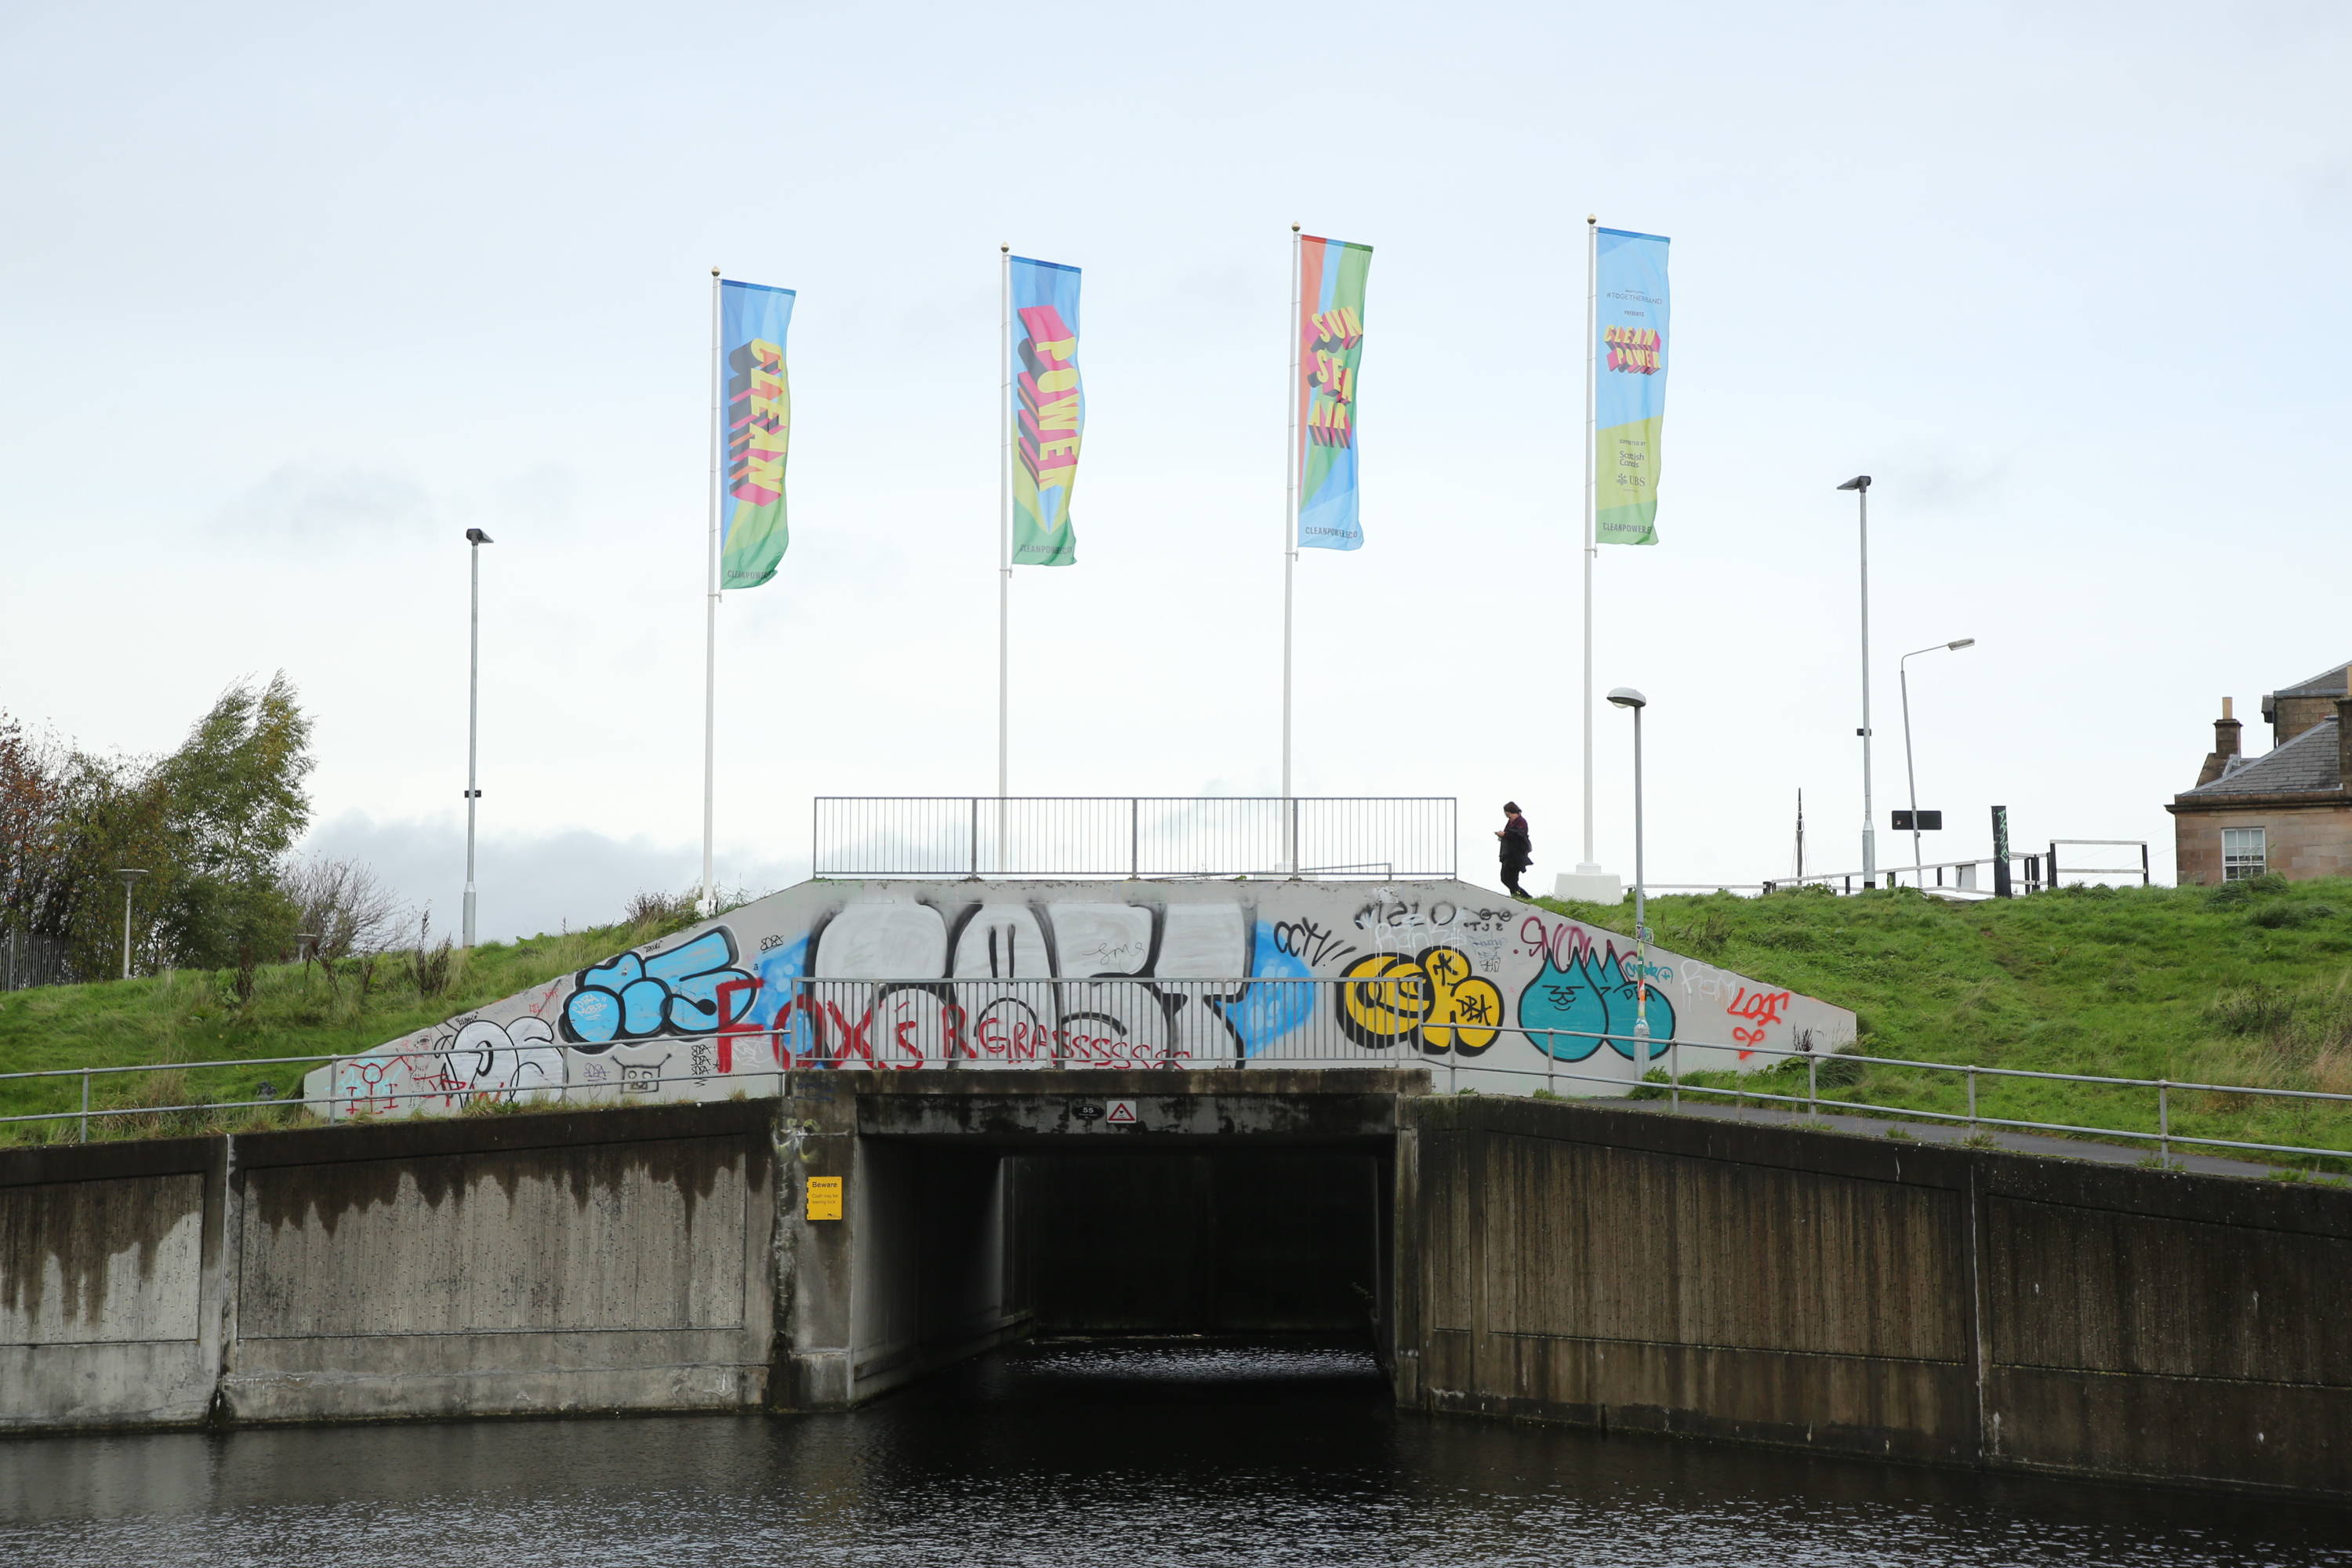 Our Scottish Canals activation featuring Morag's flags